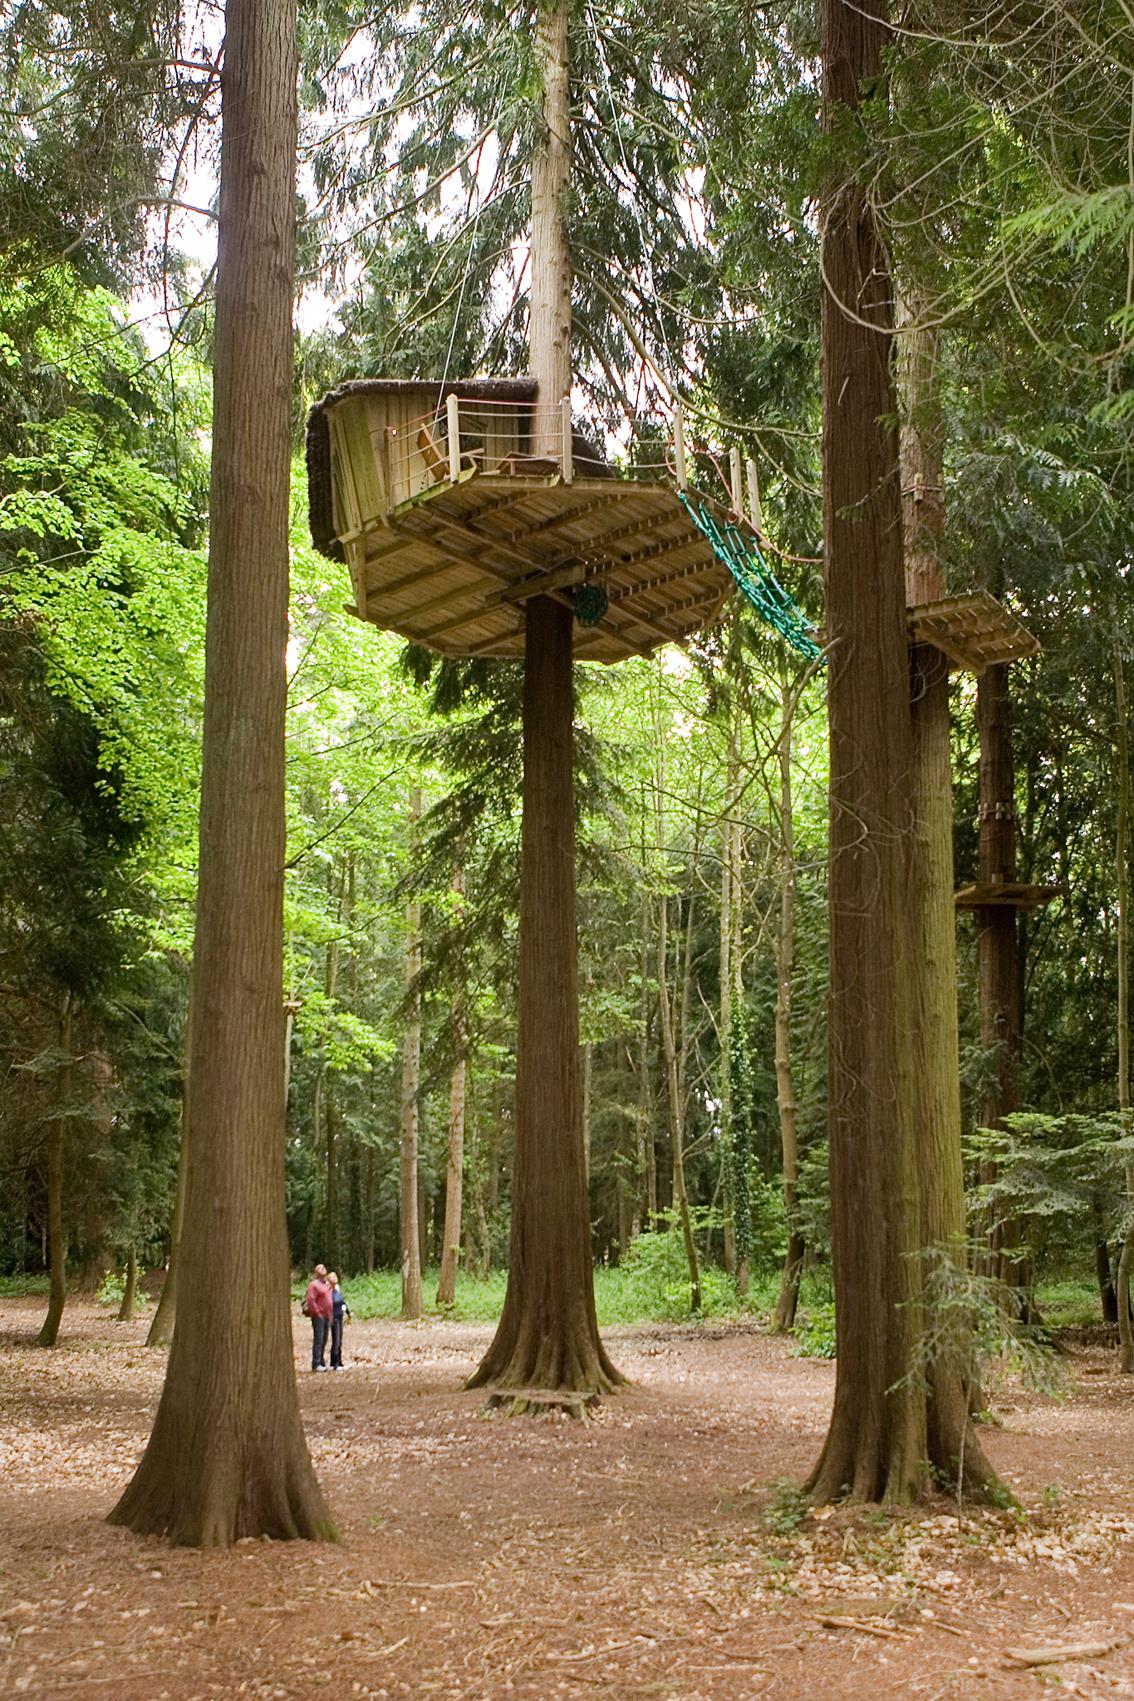 Accommodation - Treehouse Tyrolienne Breakfast Included - Castel Camping Les Ormes, Domaine & Resort